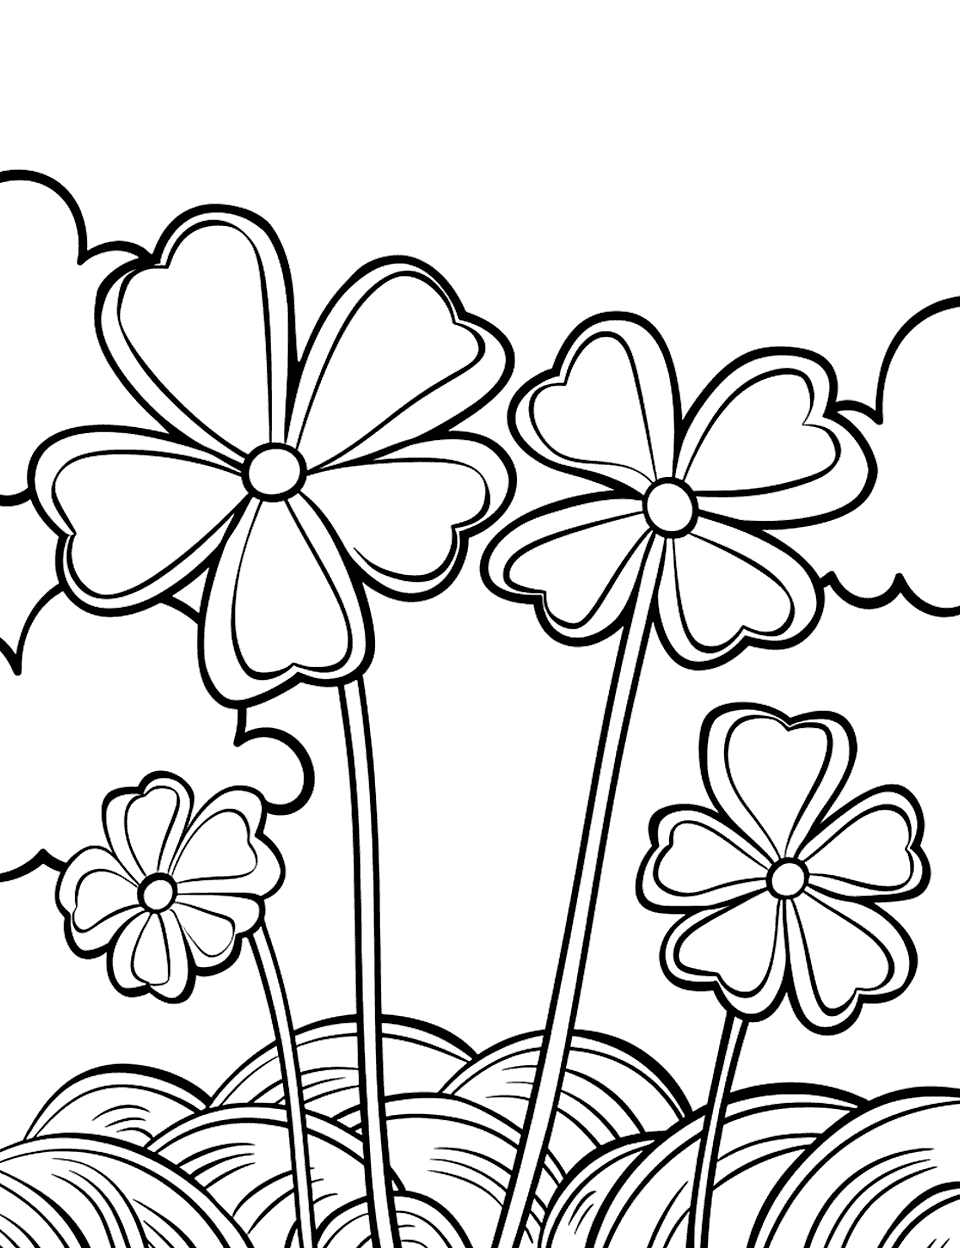 Shamrock and Clouds in the Sky Coloring Page - Simple scene of a sunny day where cloud is in the sky above a shamrock field.